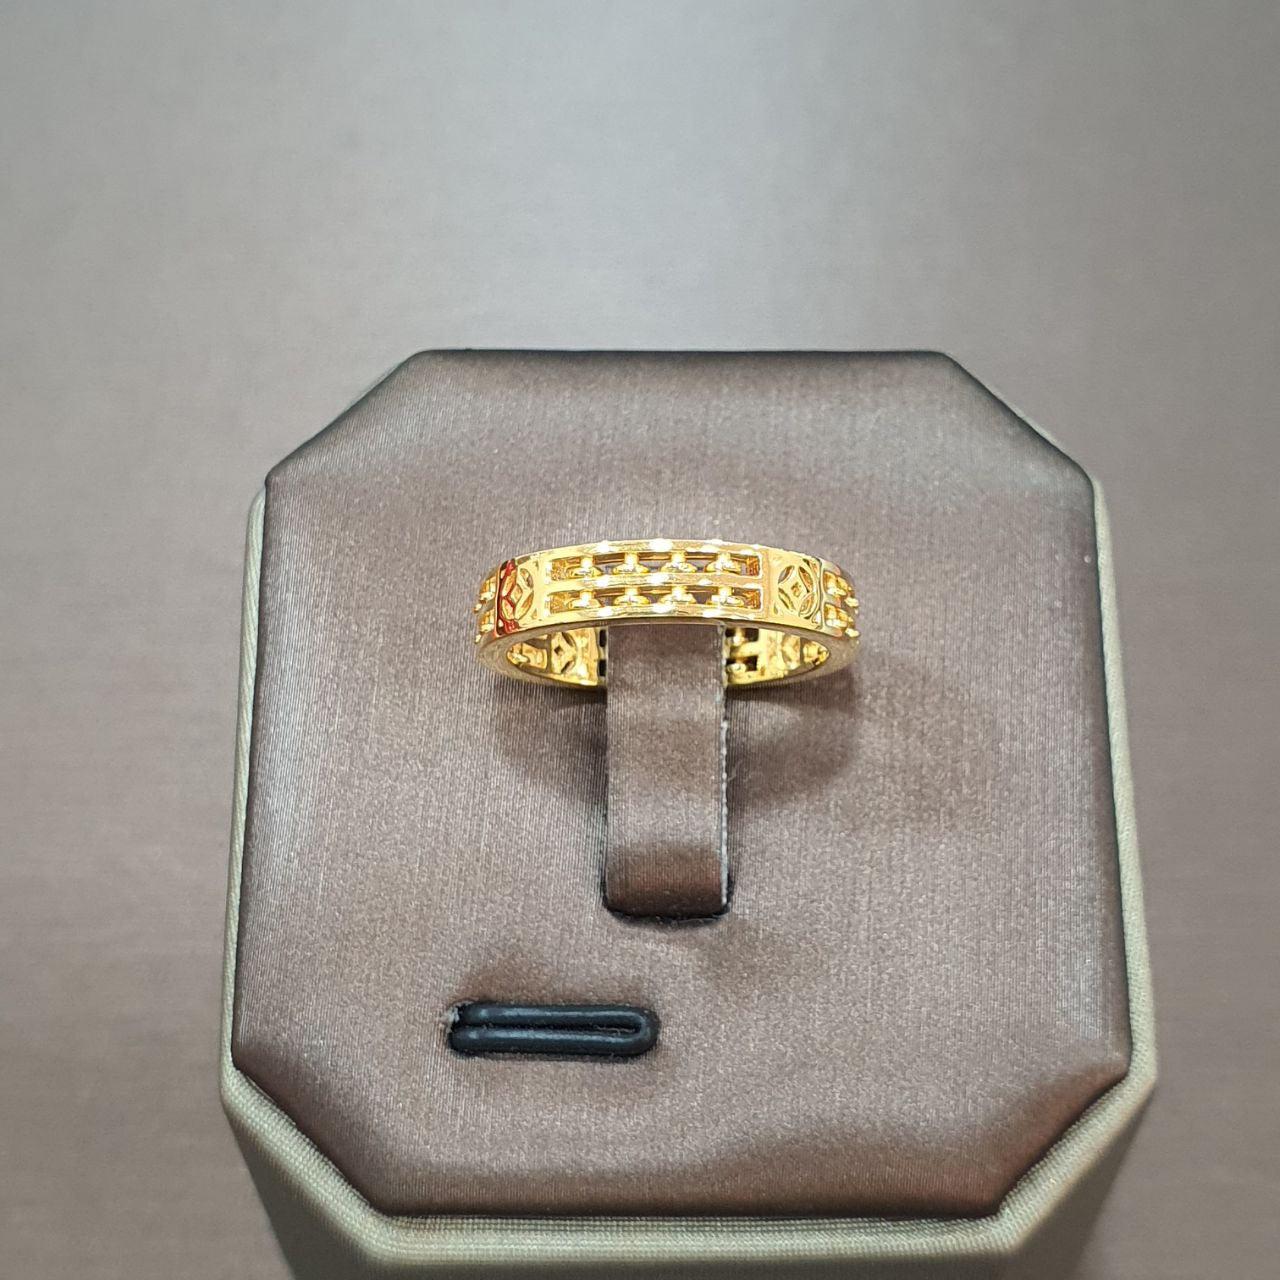 22k / 916 Gold Full Round Slim Abacus Ring with Coin-916 gold-Best Gold Shop